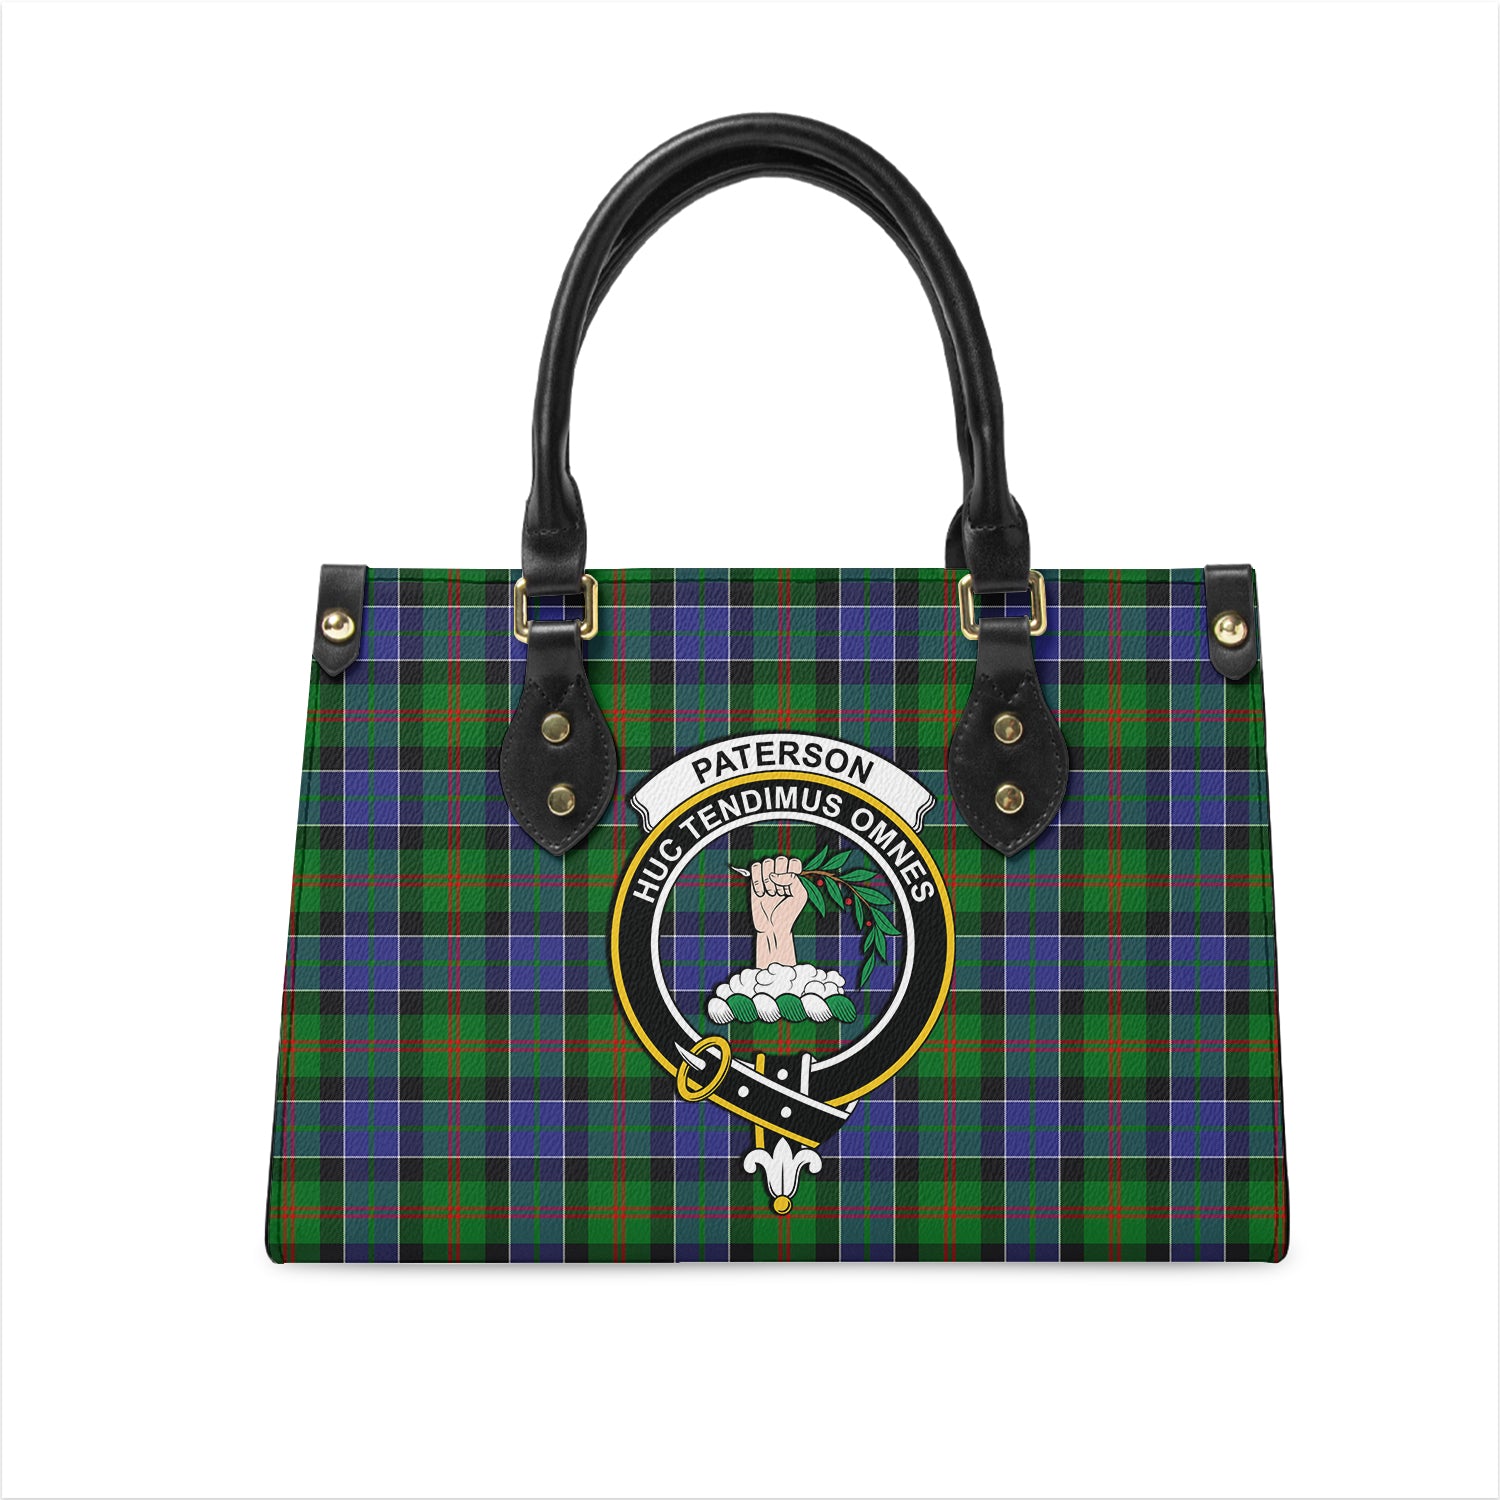 paterson-tartan-leather-bag-with-family-crest